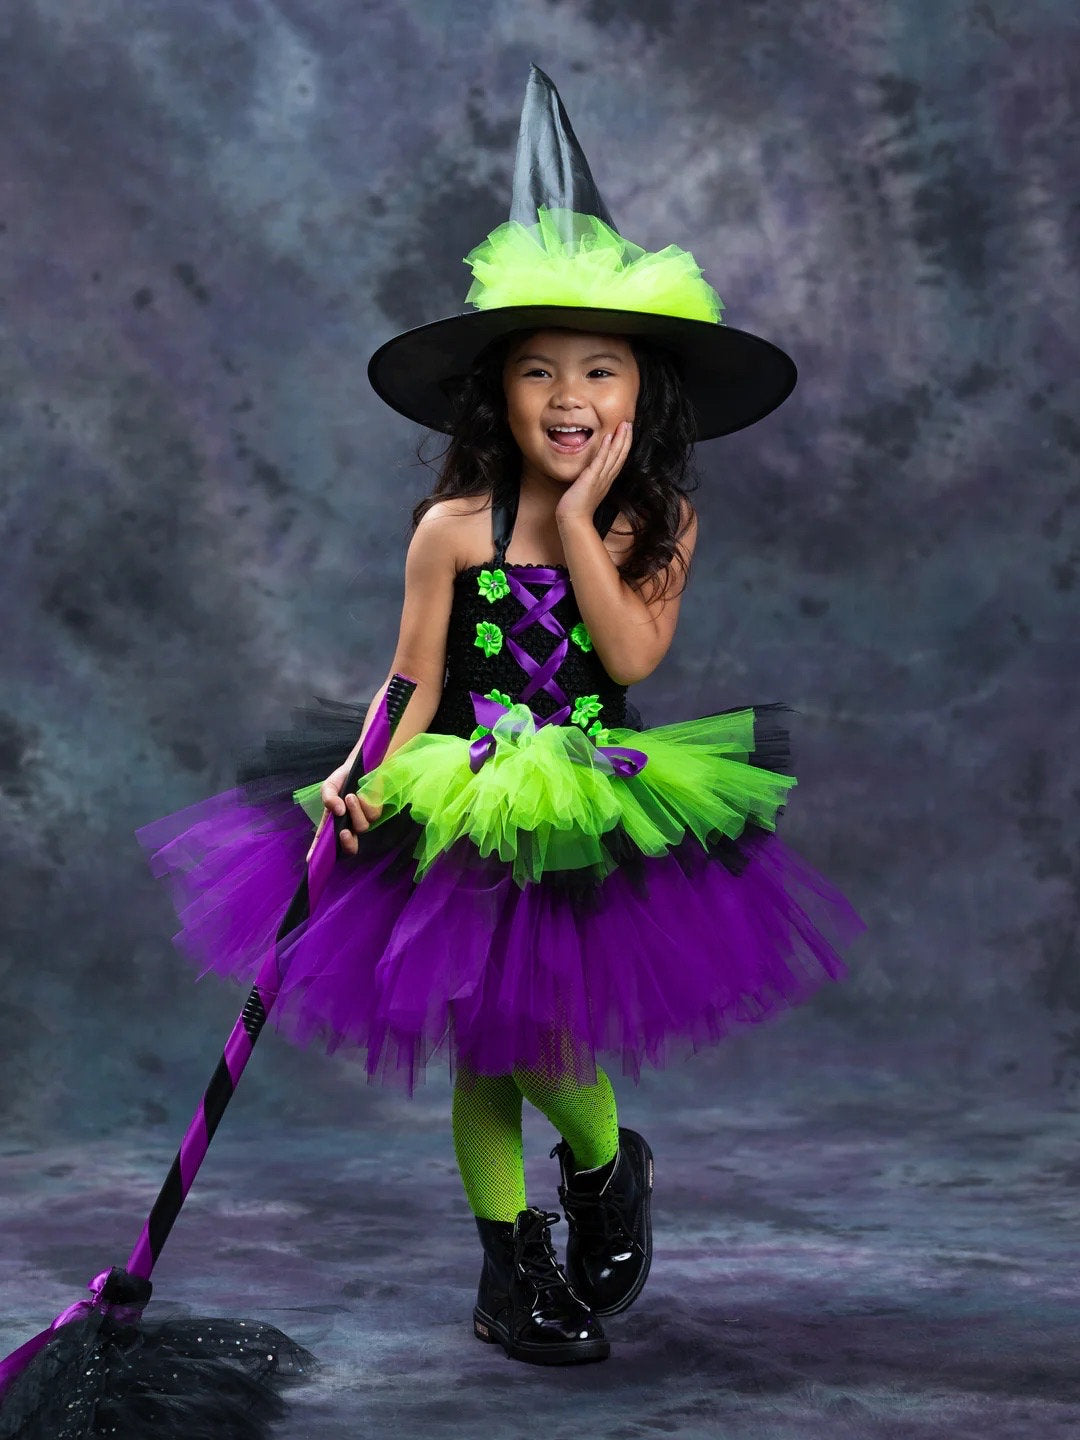 Witch Hallowen Costume for Girls Witches Tutu Dress with Hat Carnival Cosplay Costumes for Kids Girl Outfit Fluffy Ball Gown